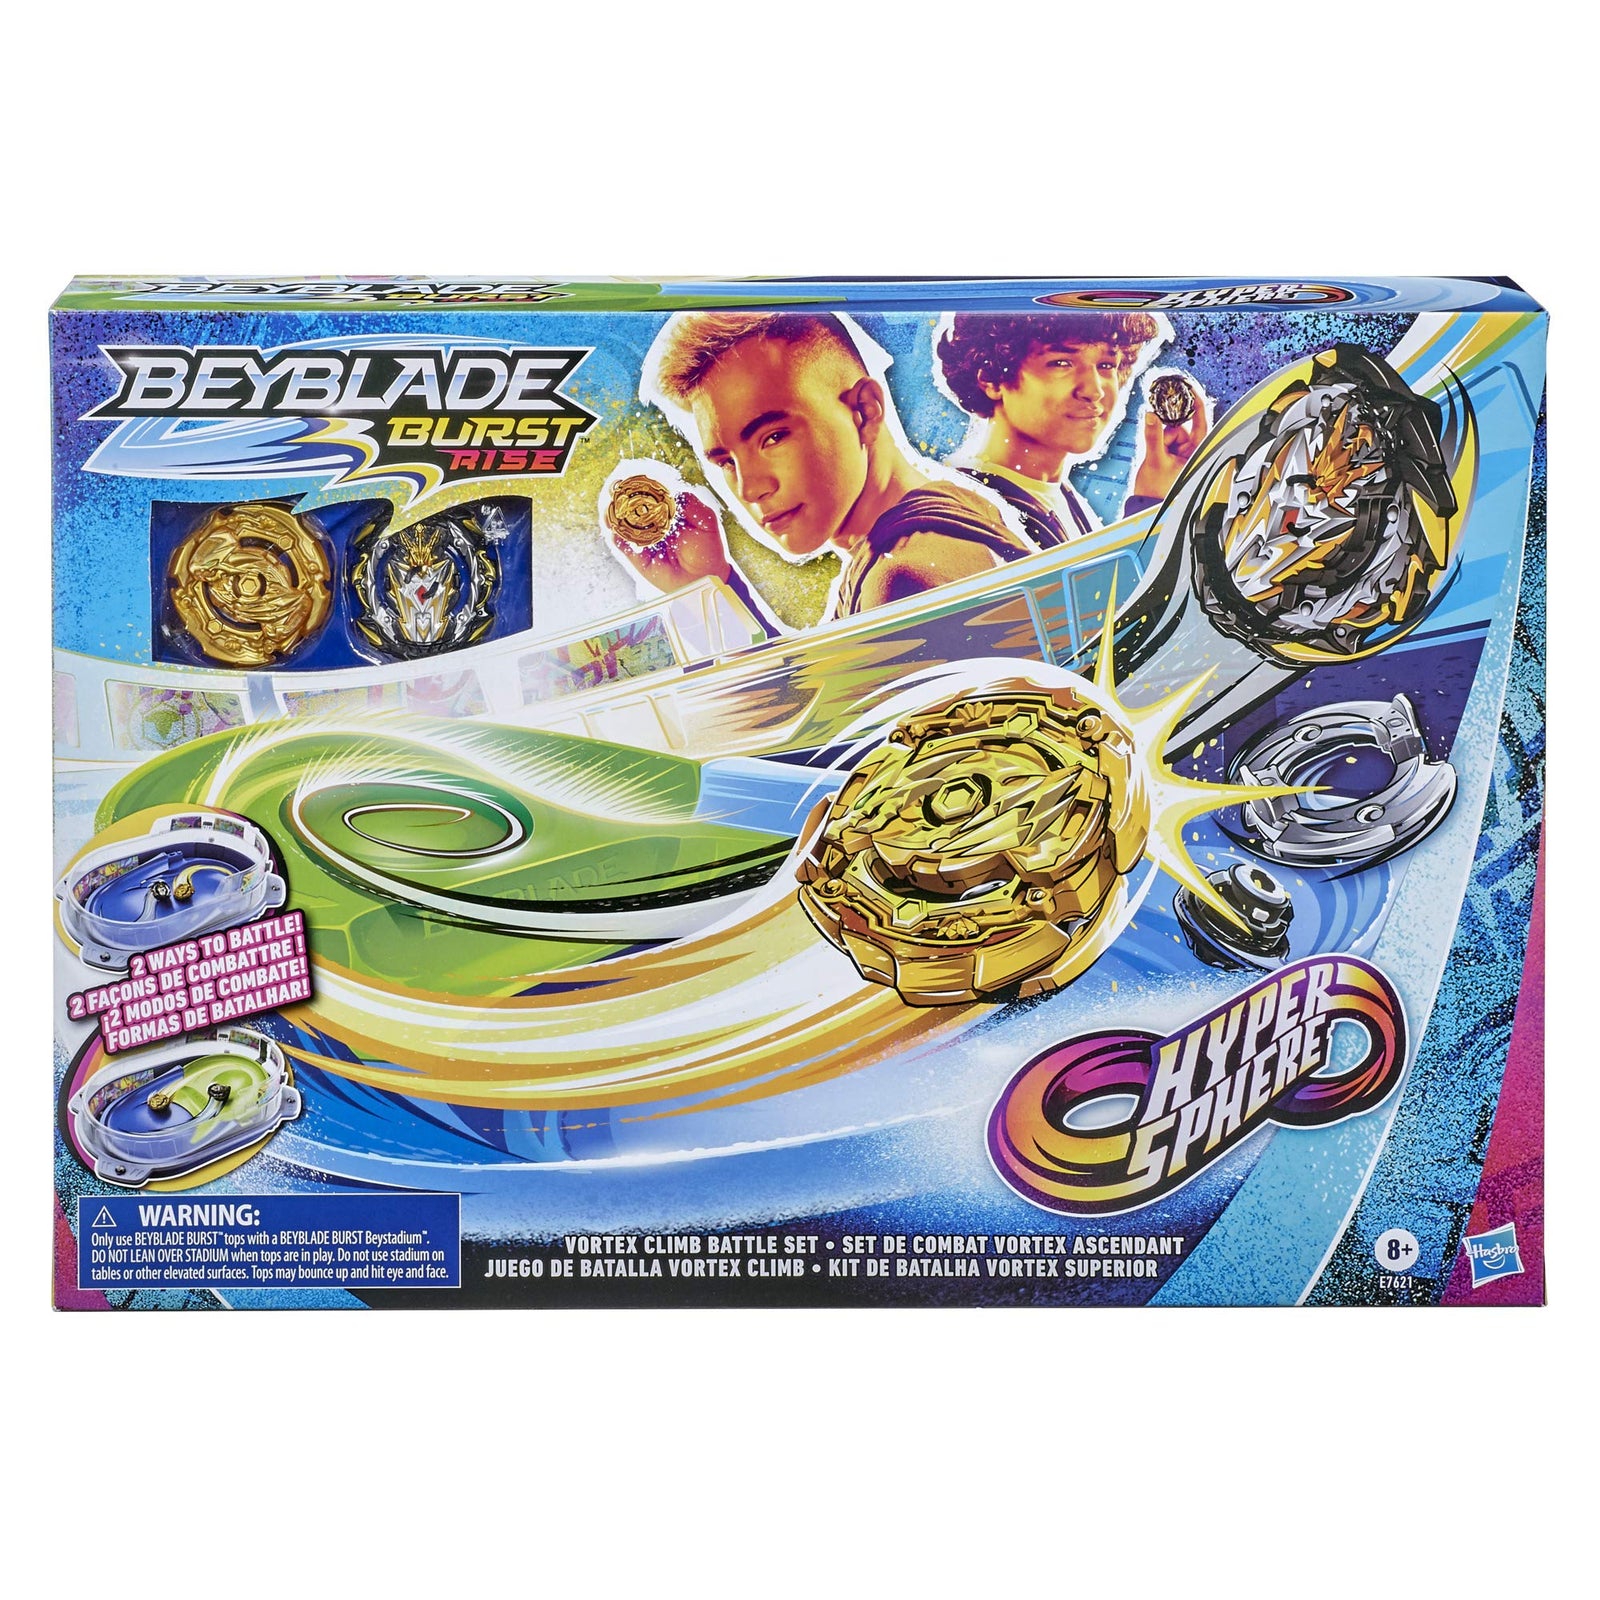 BEYBLADE Burst Rise Hypersphere Vortex Climb Battle Set -- Complete Set with Beystadium, 2 Battling Top Toys and 2 Launchers, Ages 8 and Up